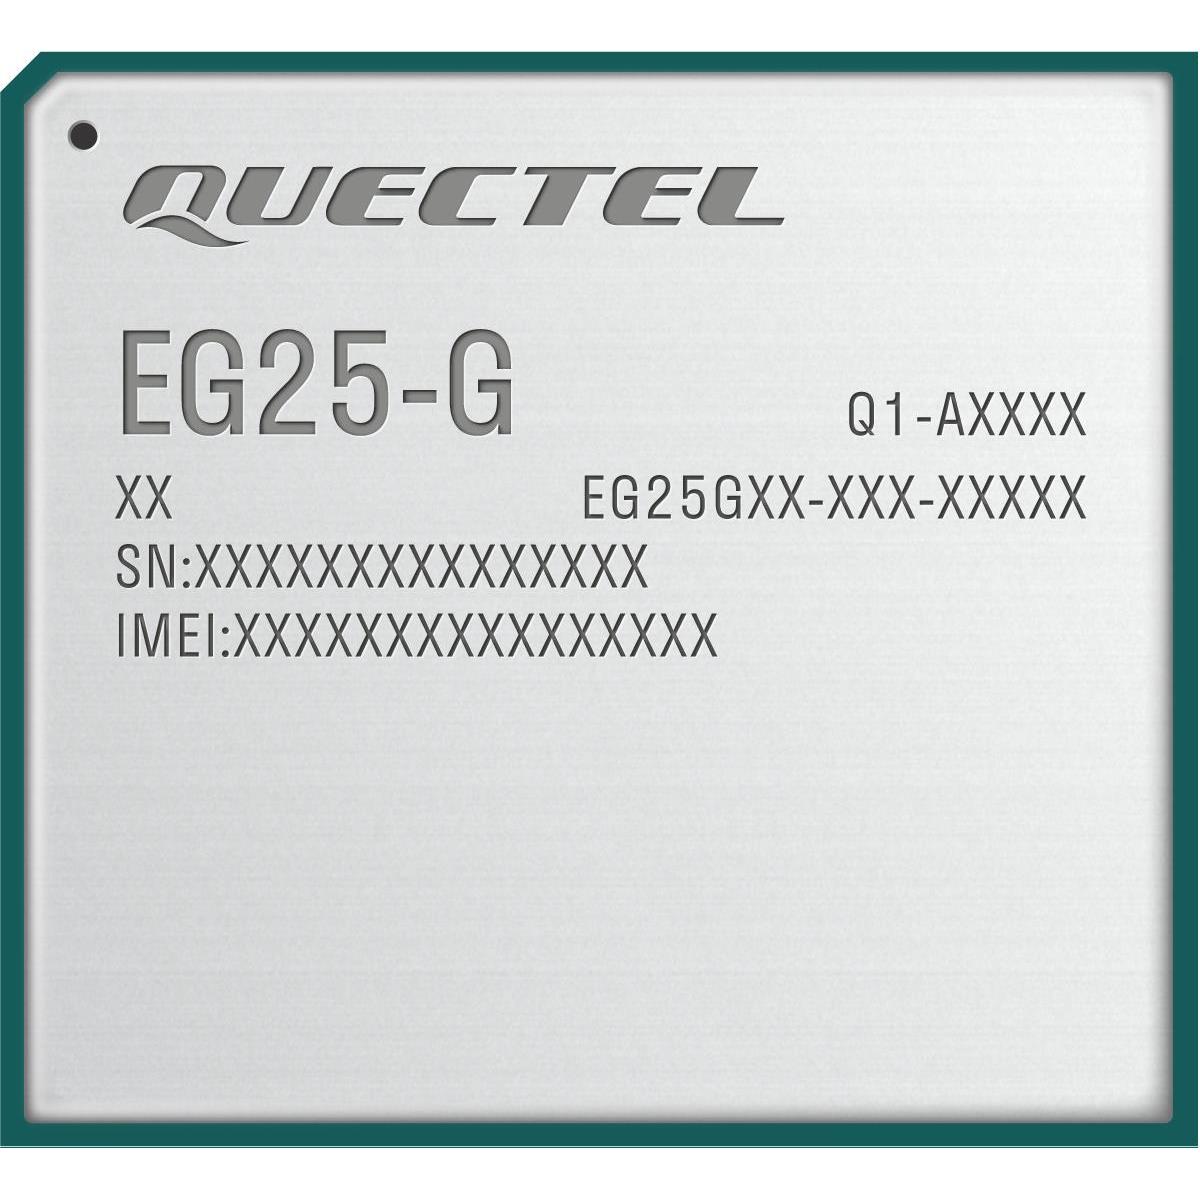 the part number is EG25GGBTEA-256-SGNS